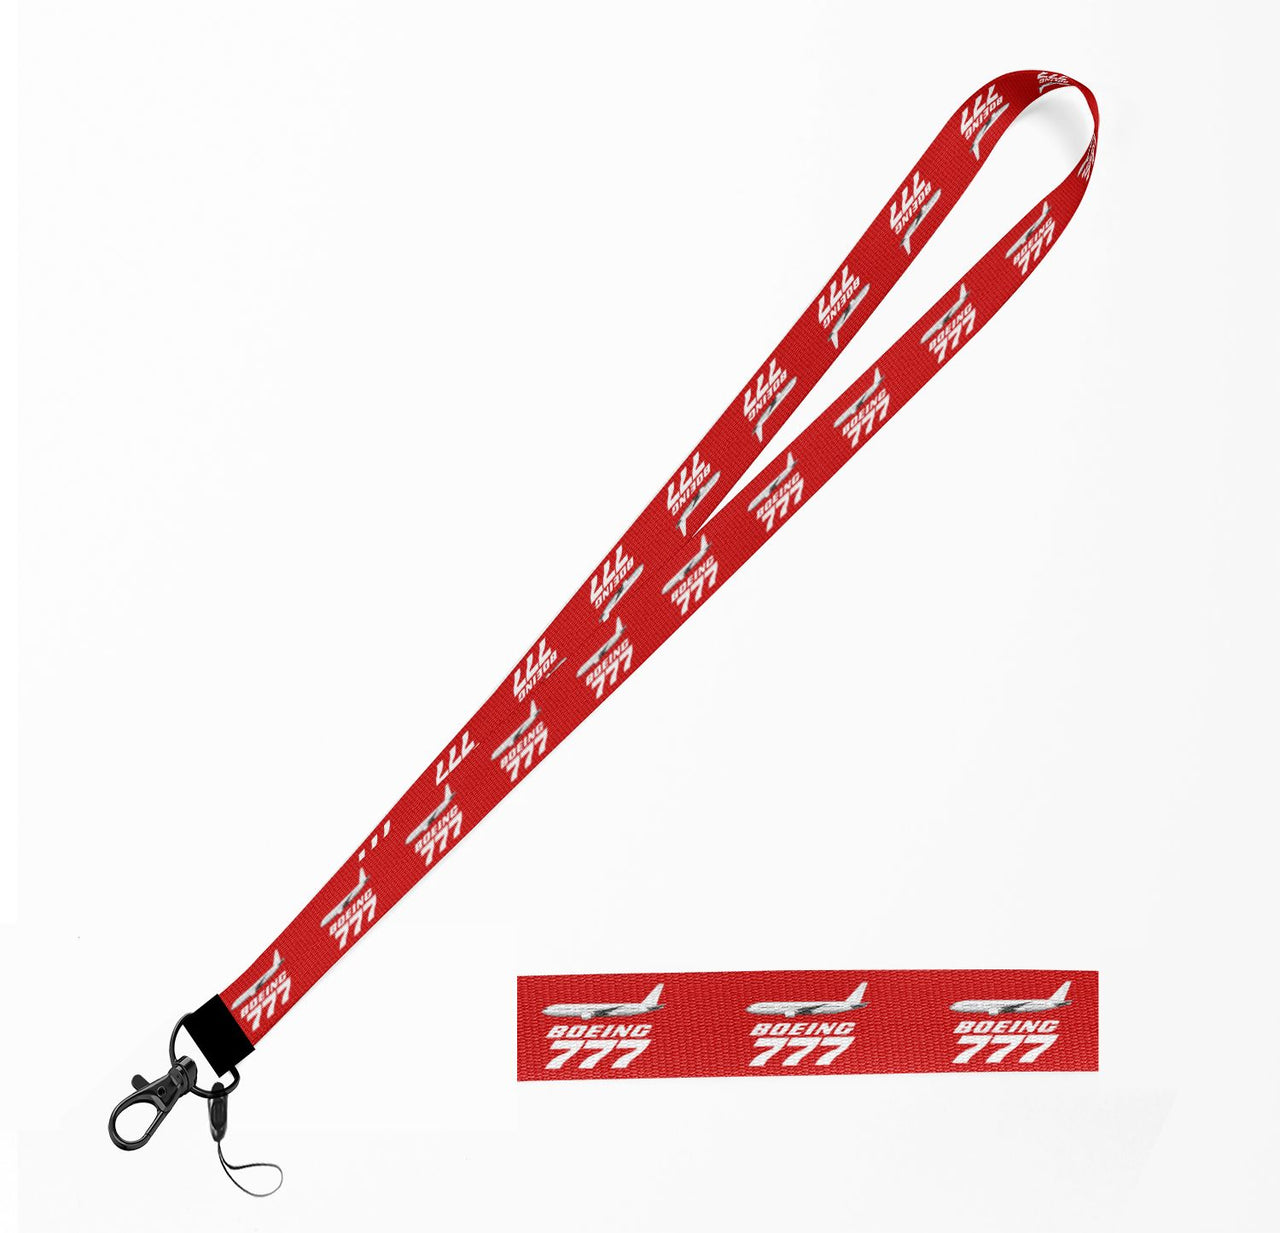 The Boeing 777 Designed Lanyard & ID Holders